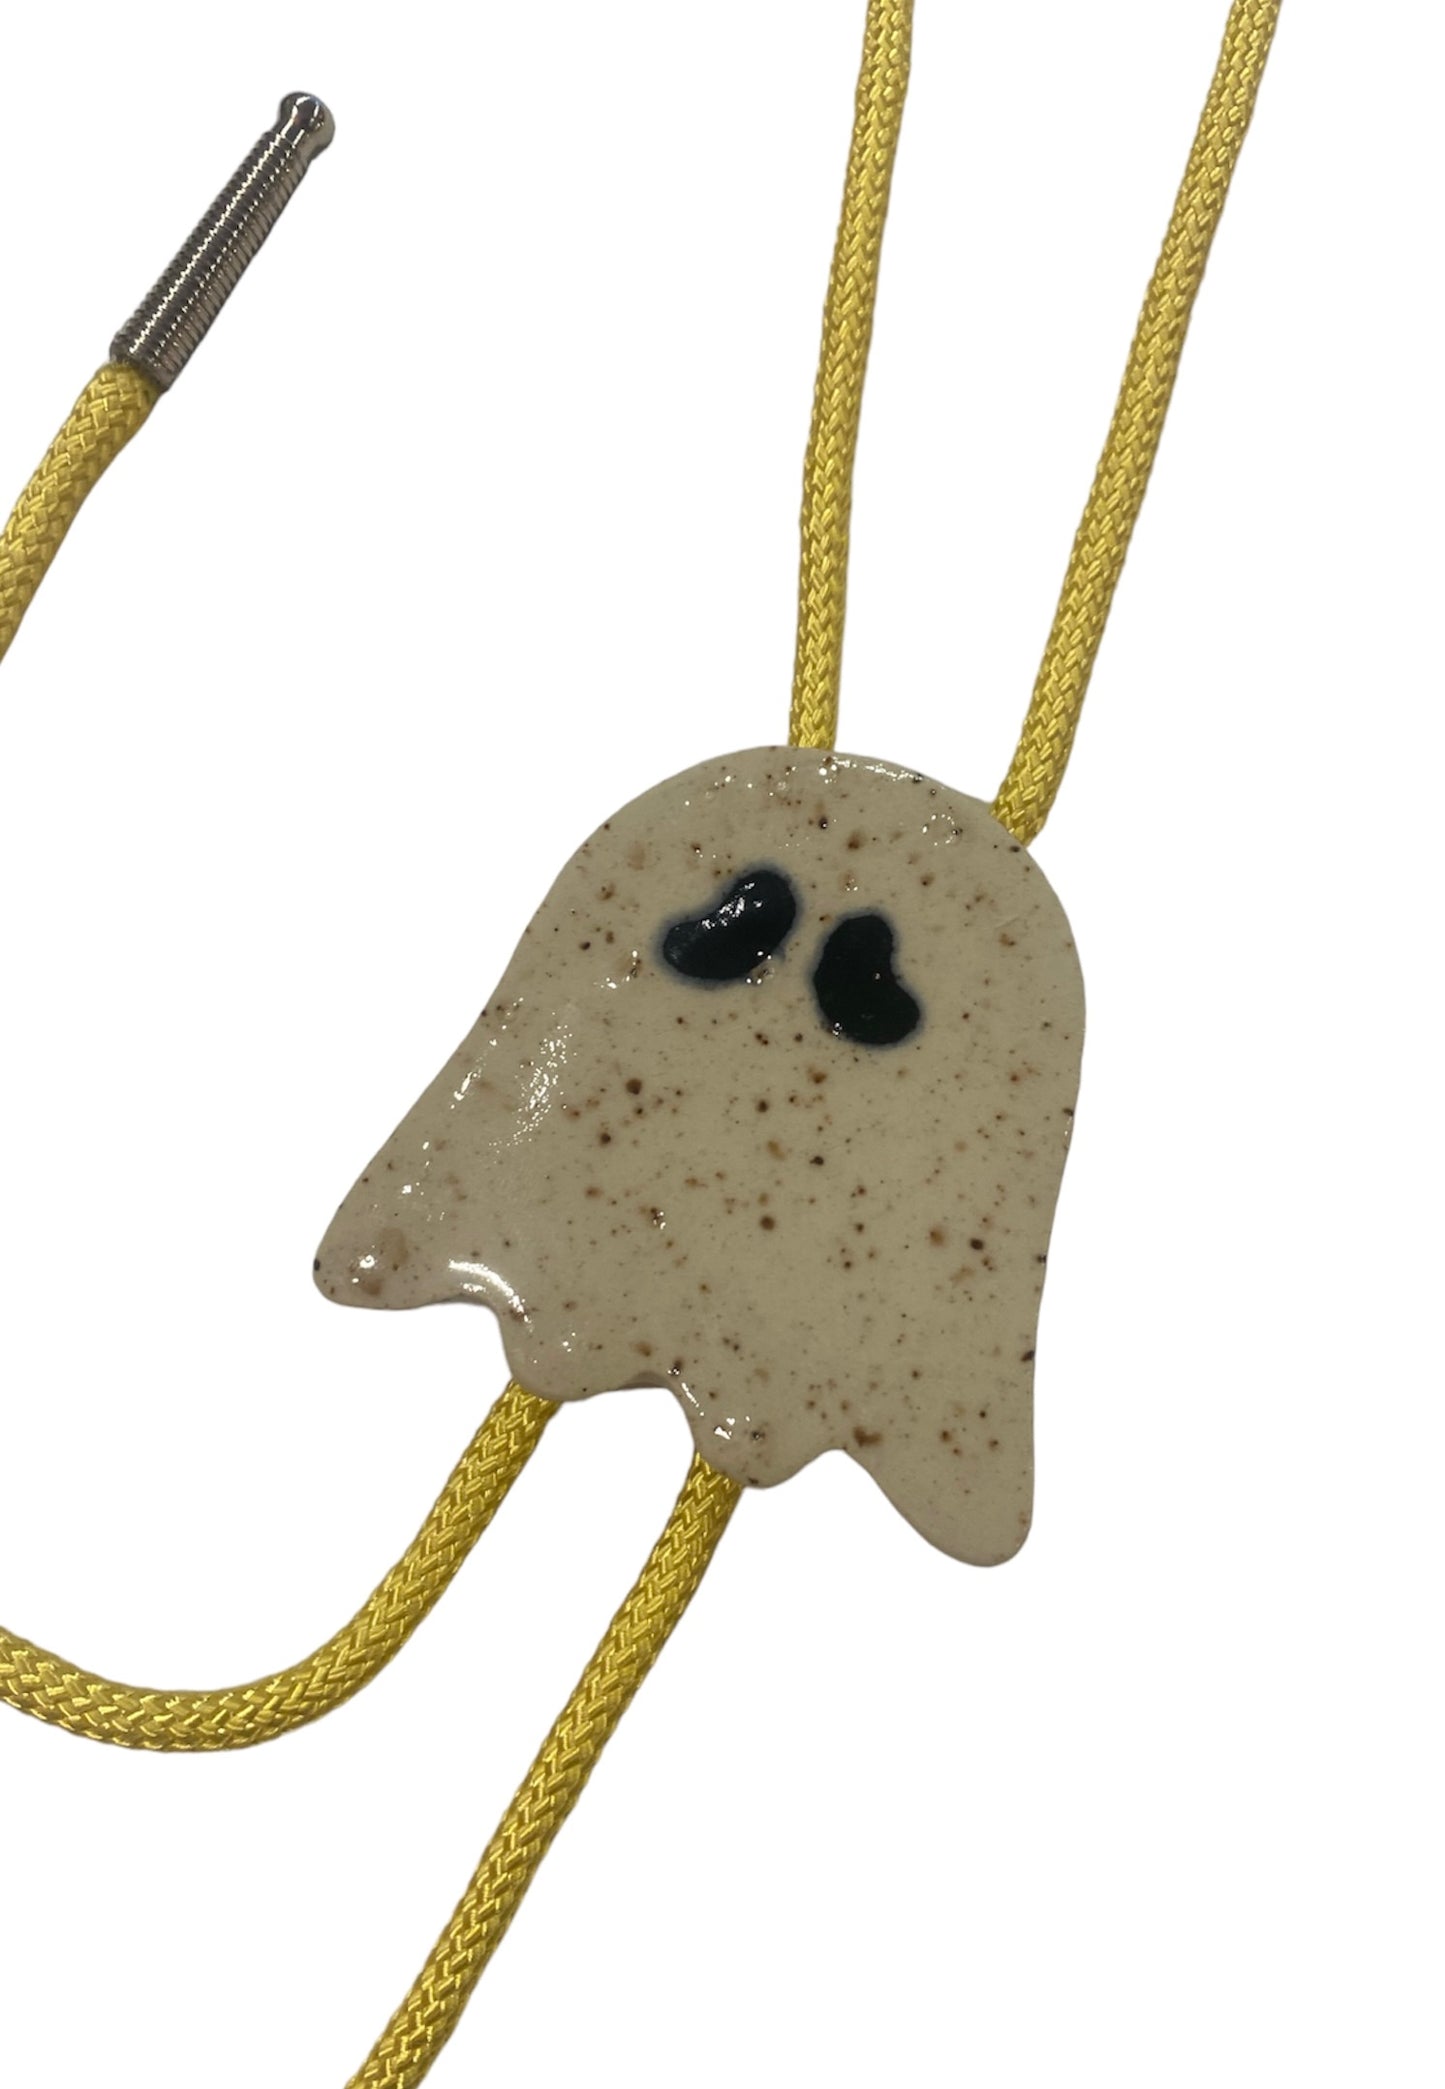 Handmade Ceramic Ghosty Bolo Tie by The Introverted Potter